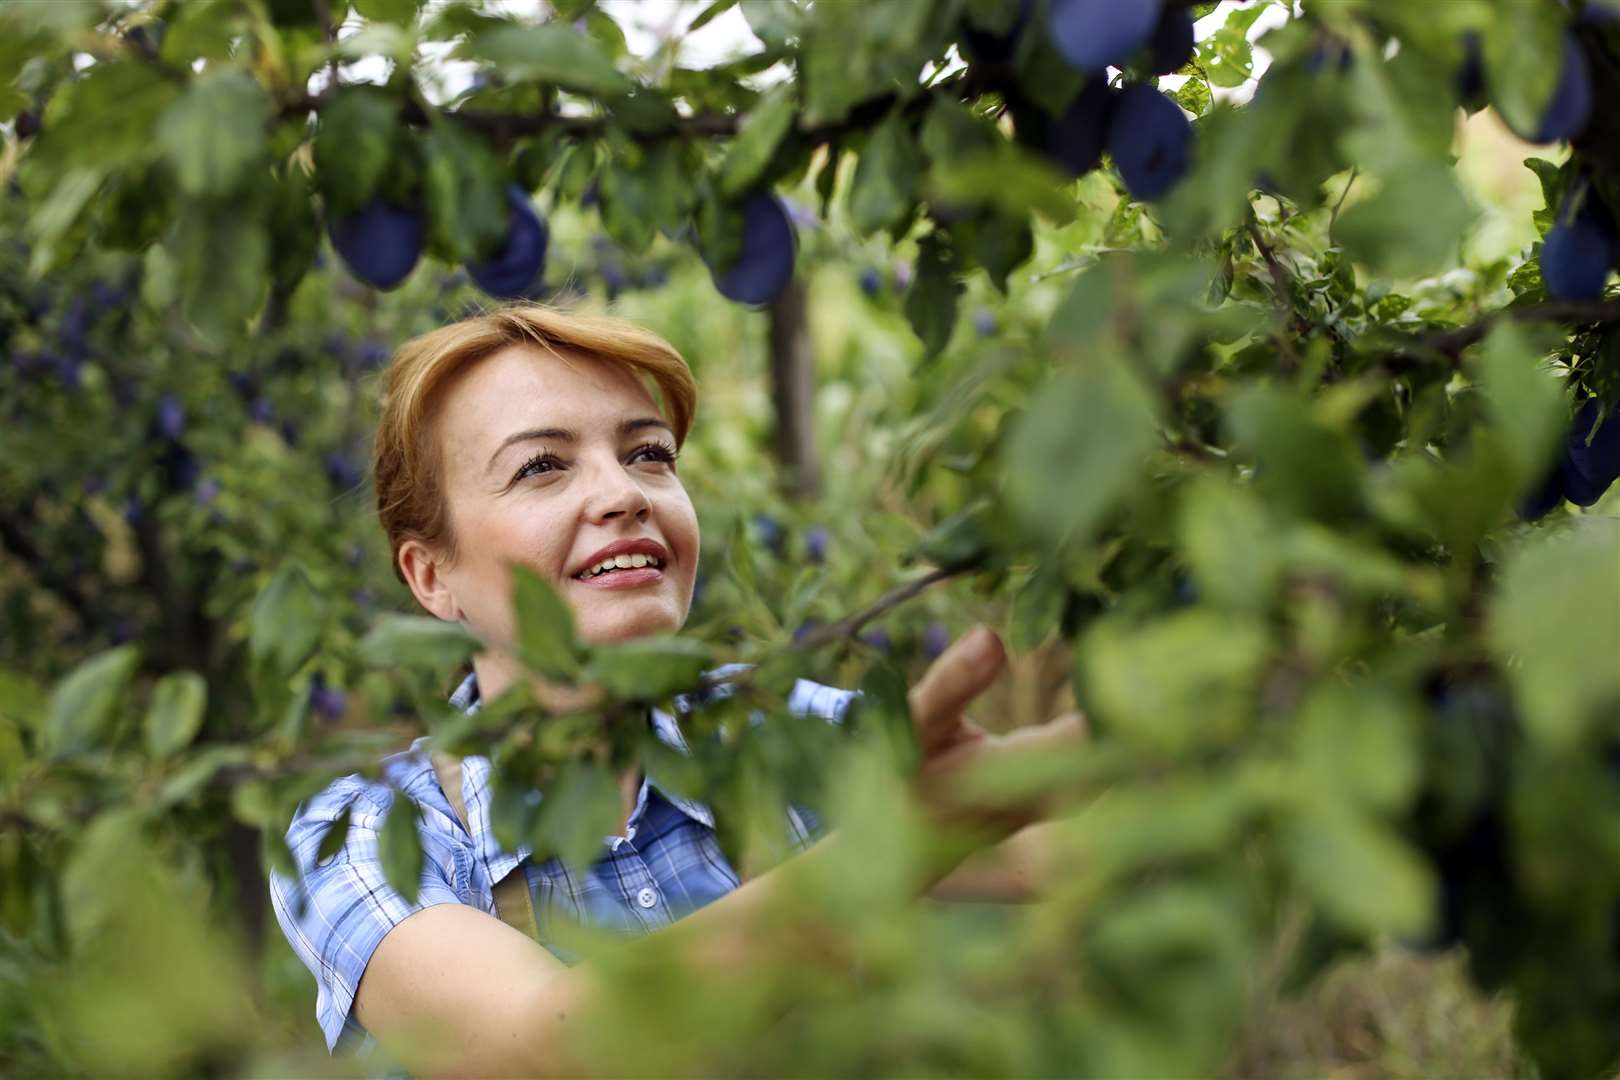 For the first time members will be able to pick plums from the Brogdale orchards in Faversham. Picture: iStock